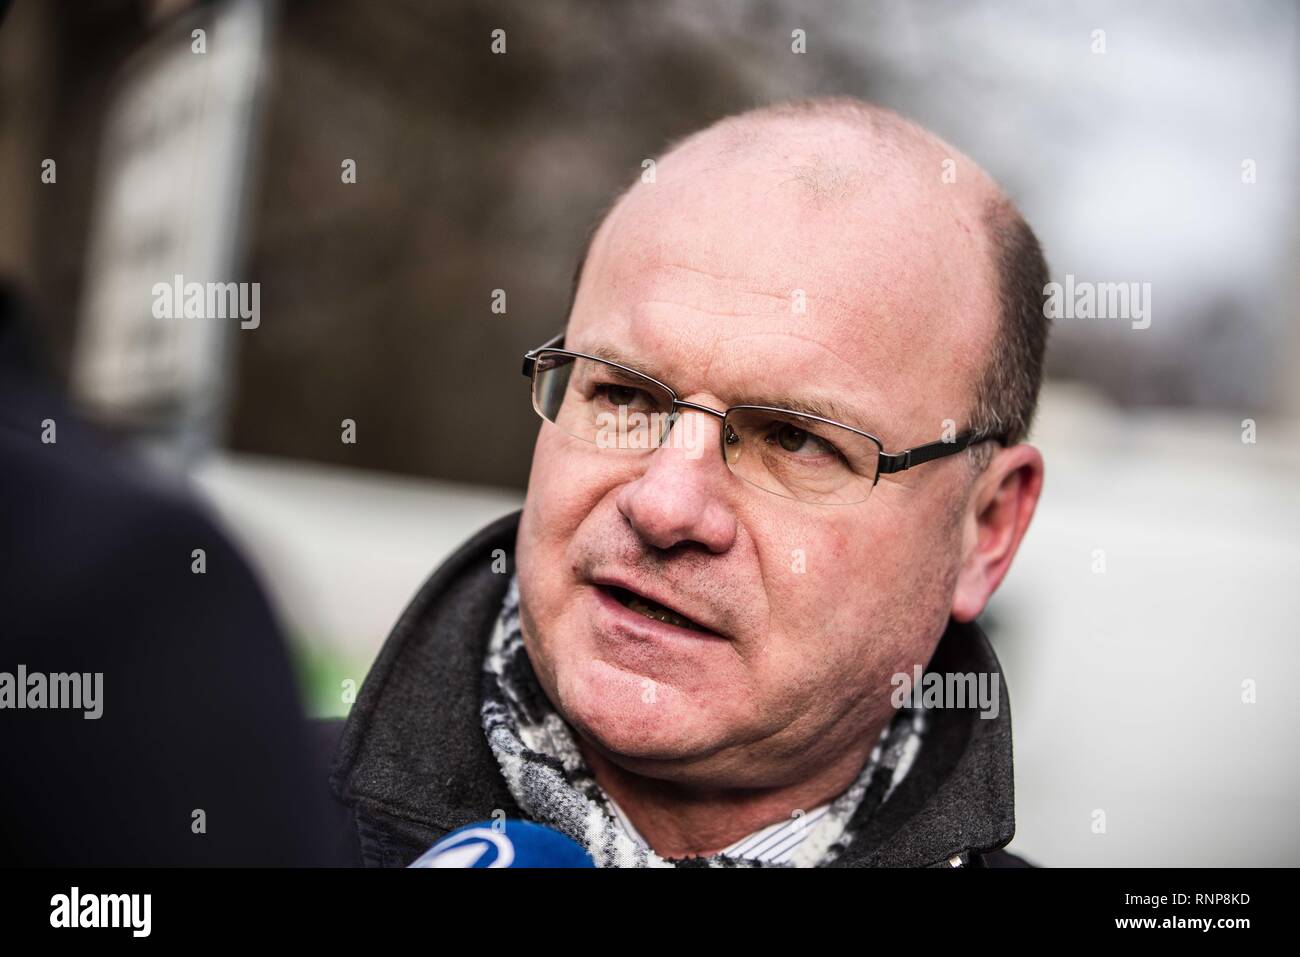 Munich, Bavaria, Germany. 20th Feb, 2019. Dr. Norbert SchÃ¤ffer (Vorsitzender des LBV, Landesbund fÃ¼r Vogelschutz in Bayern). After being deemed the most successful citizen initiative in the history of Bavaria with over 1.7 million signatures collected representing 18.4% of Bavaria, the groups behind the Volksbegehren Artenvielfalt, aka Save the Bees and Citizens' Initiative Species Diversity continue their work towards entering the initiative into law. The Save the Bees initiative is designed to put measures into place to not only prevent die offs of bees, but of various species thro Stock Photo